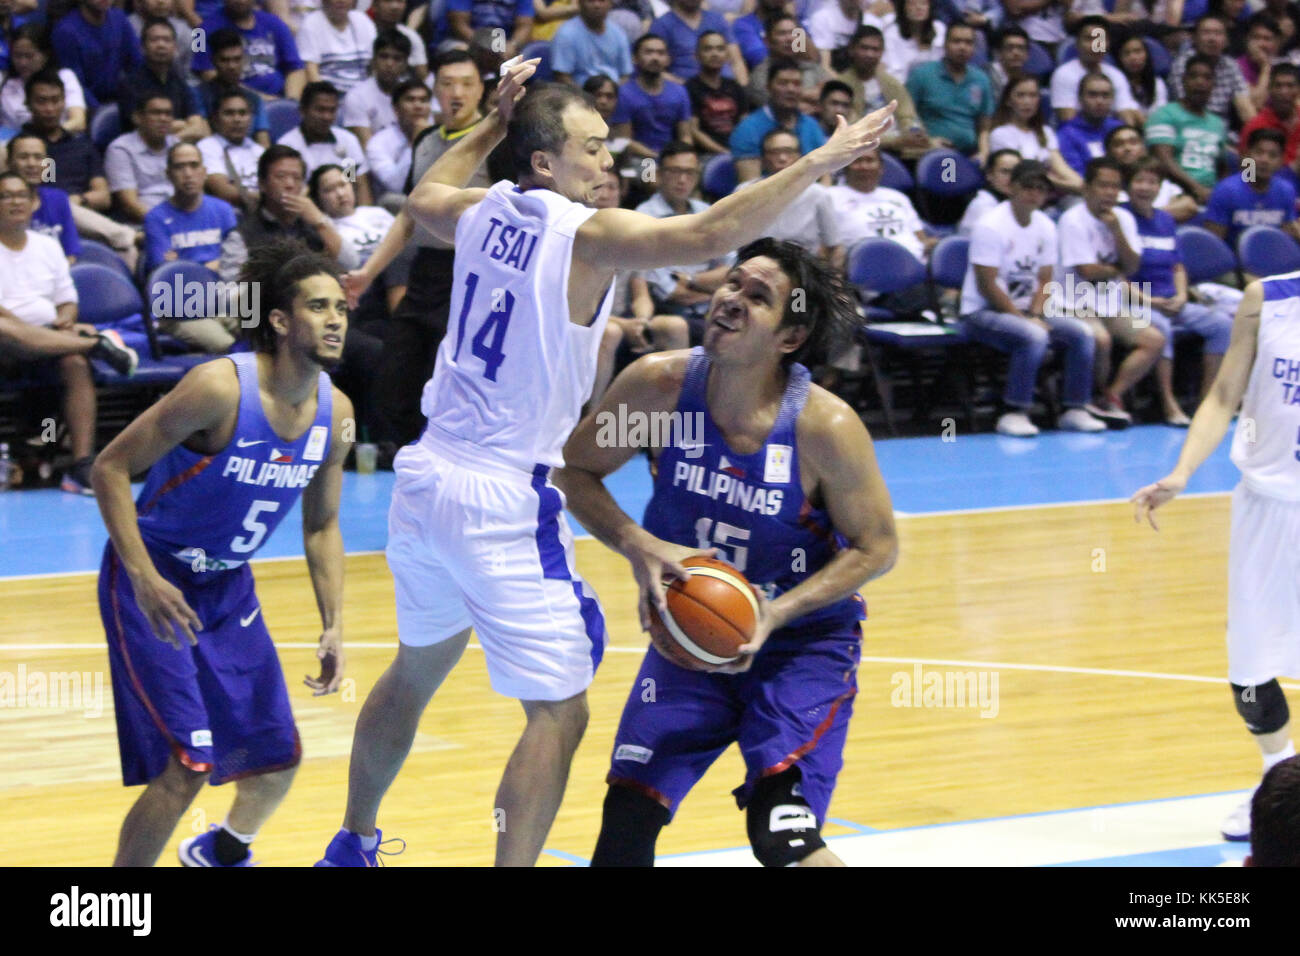 Quezon City, Philippines. 27th Nov, 2017. Junemar Fajardo (15) of the Philippines tries to shoot the ball over Wen-Cheng Tsai (14) of Chines Taipei during their FIBA World Cup Qualifying Match. Gilas Pilipinas defeated the visiting Chinese Taipei team 90-83 to complete a sweep of their first two assignments in the FIBA 2019 World Cup qualifiers. Credit: Dennis Jerome Acosta/ Pacific Press/Alamy Live News Stock Photo